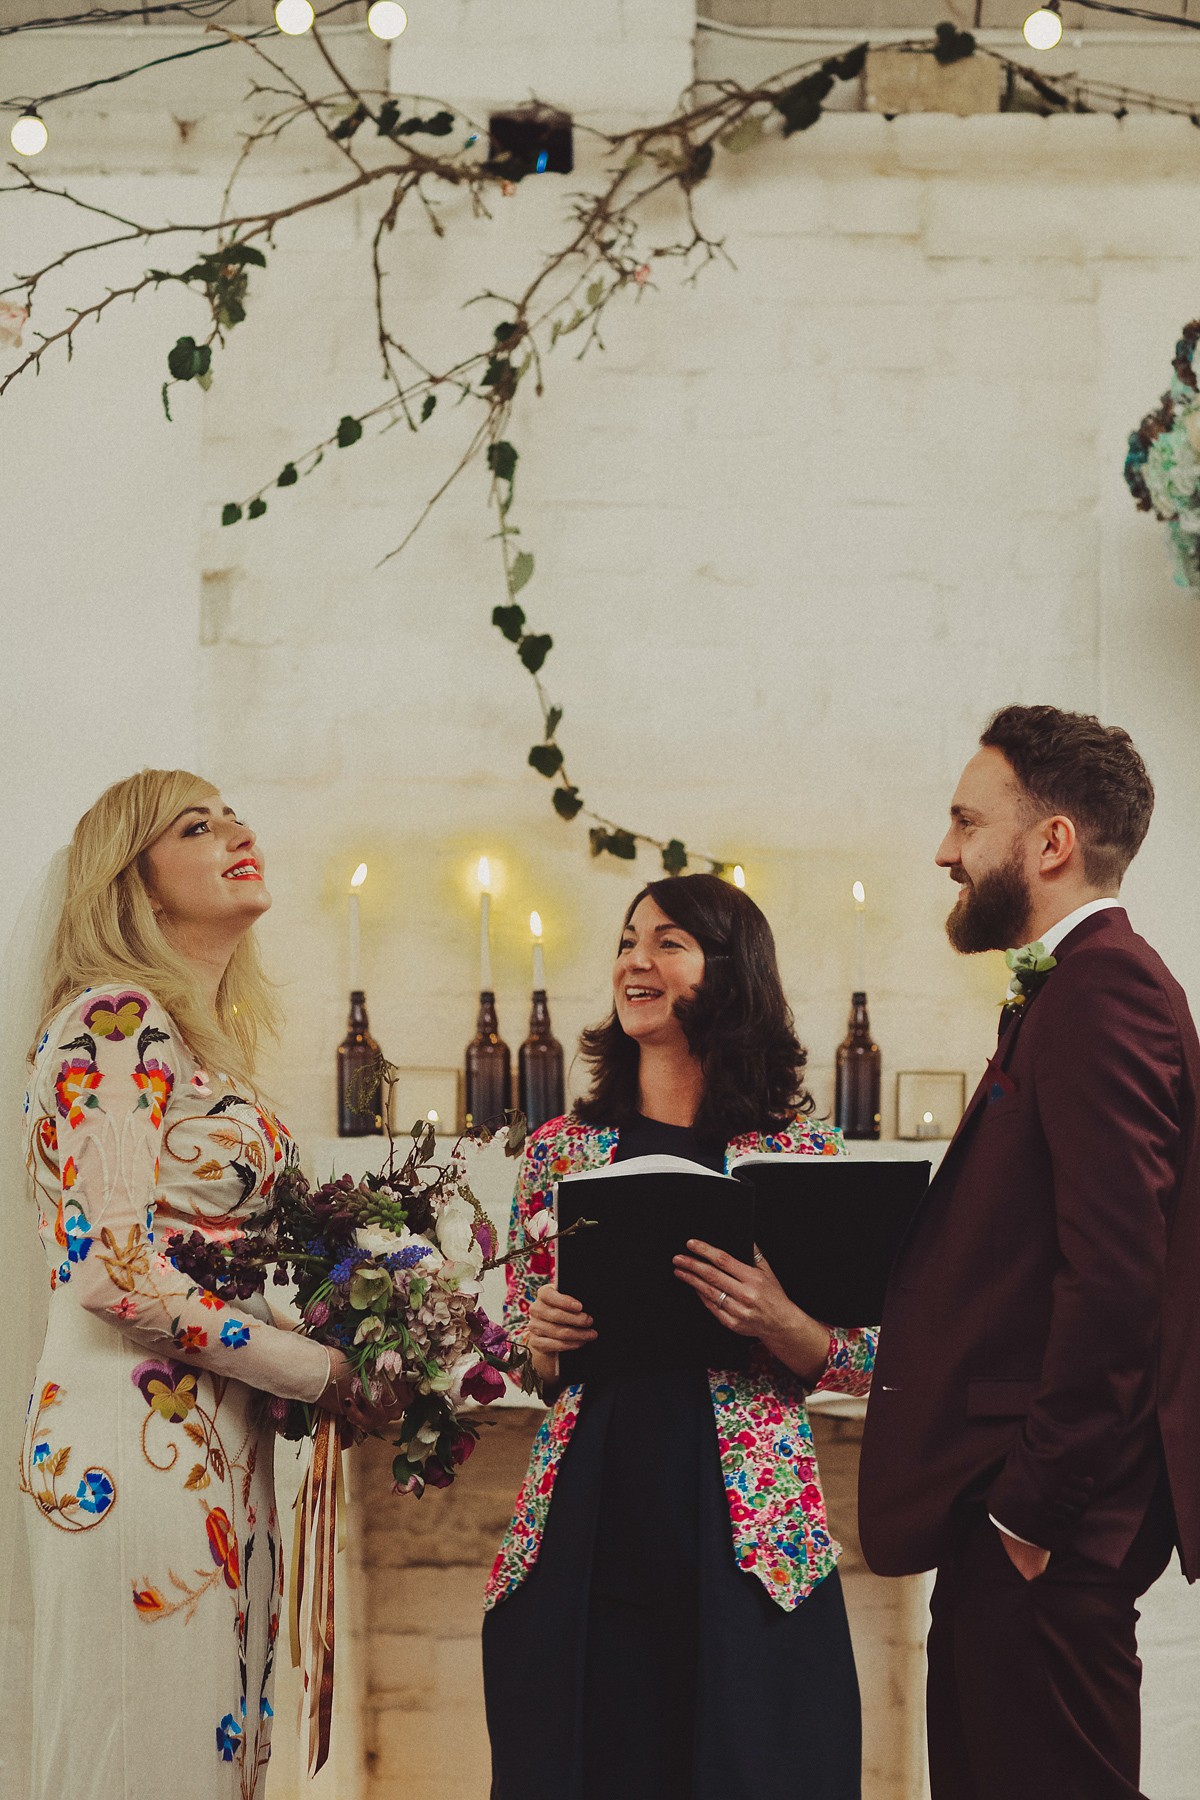 Gillian wore a colourful embroidered long sleeved gown by Temperley for her modern and alternative Woodside Warehouse wedding in Glasgow. Photography by Dan O'Day.